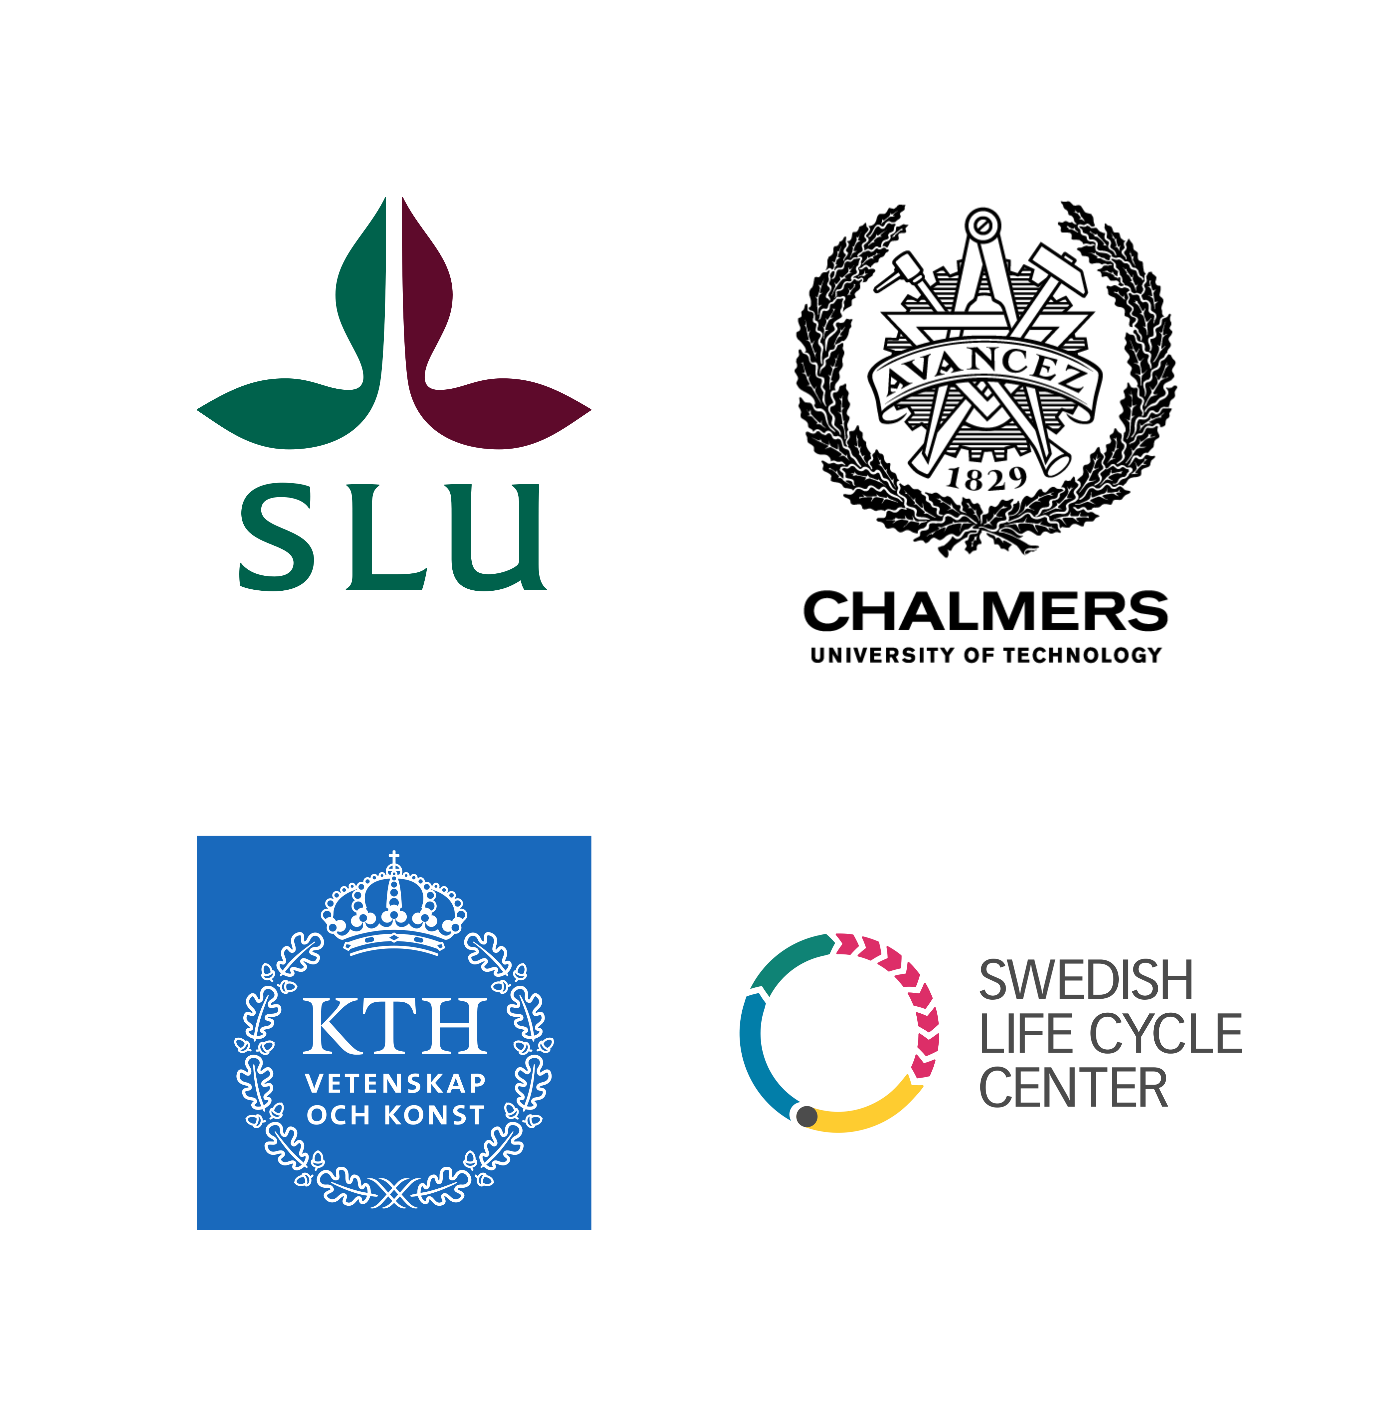 The logotypes of SLU, Chalmers, KTH, and the Swedish Life Cycle Center is shown